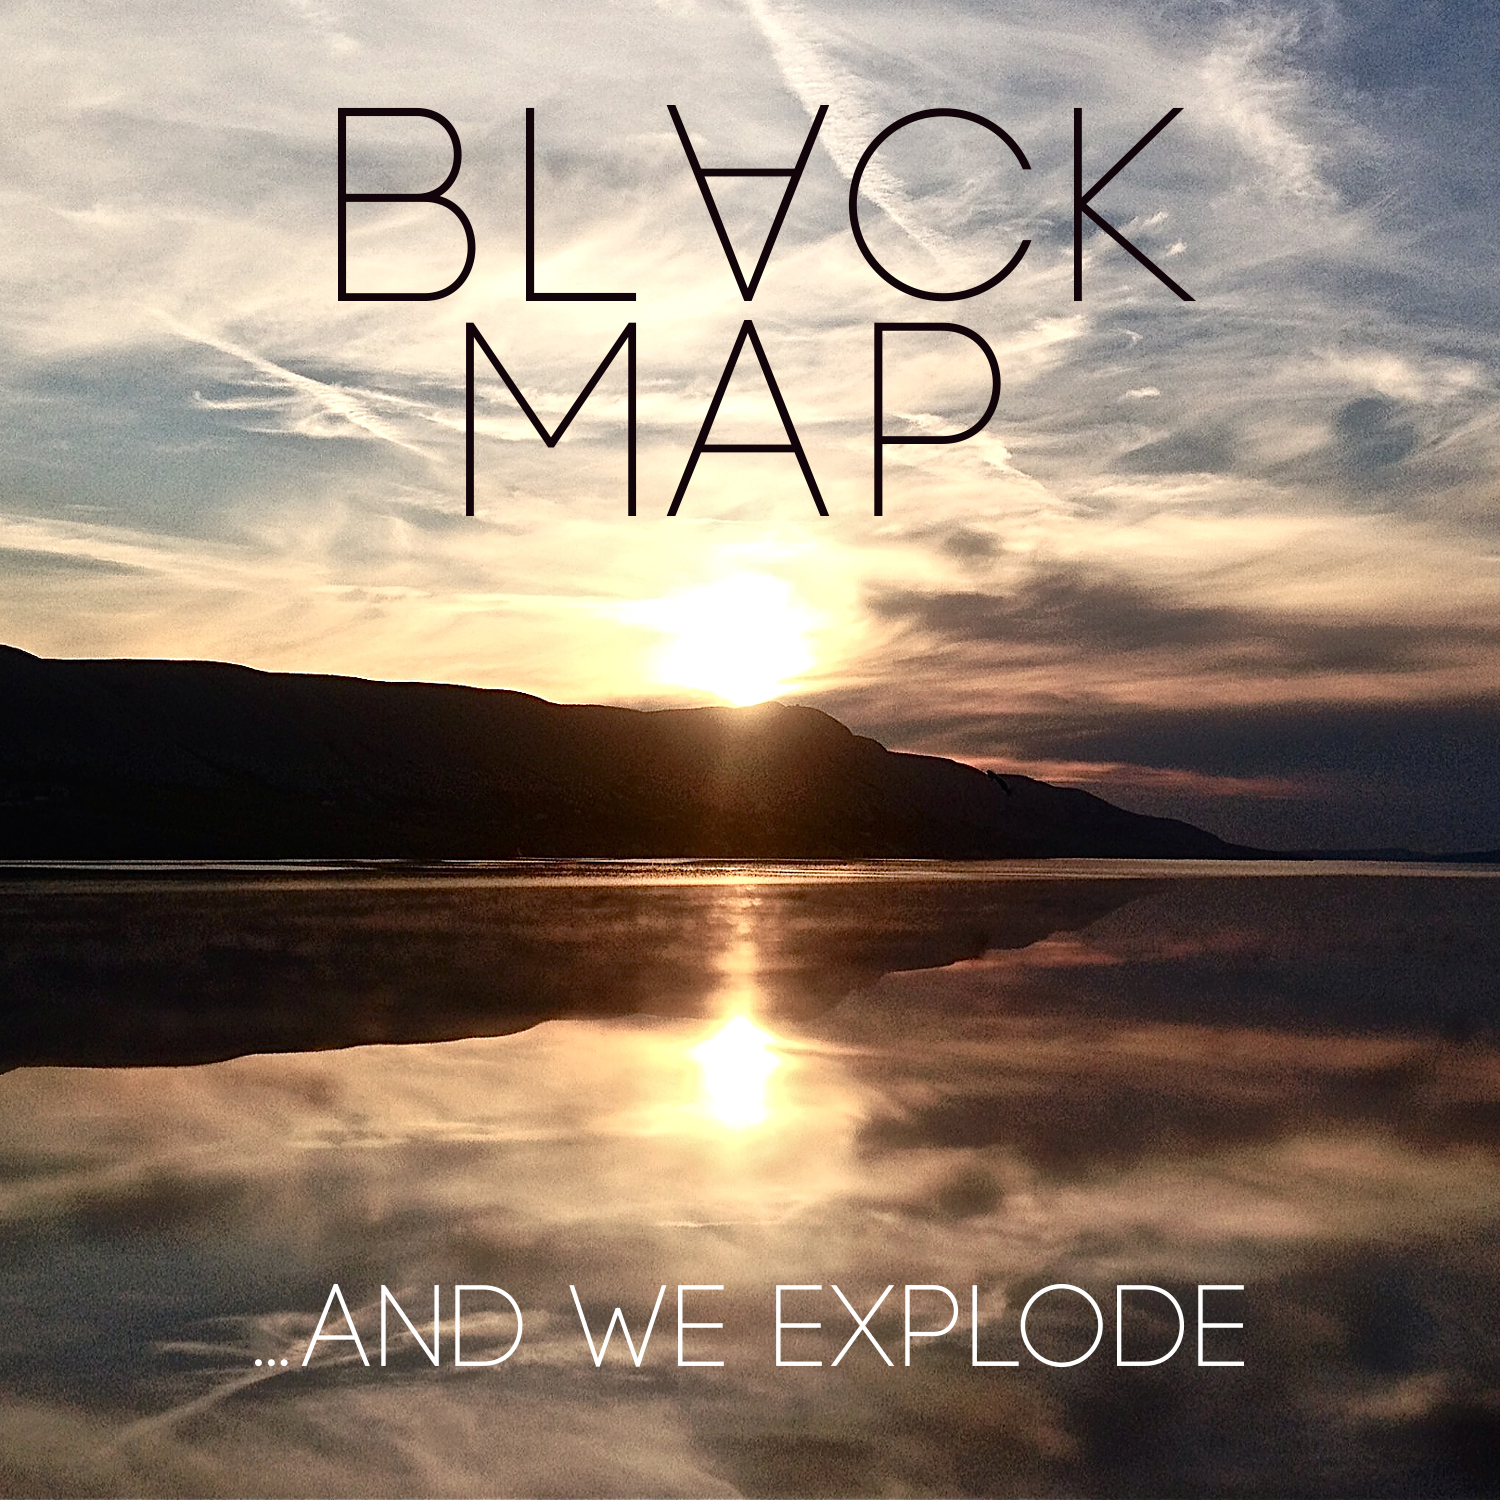 Black Map …AND WE EXPLODE